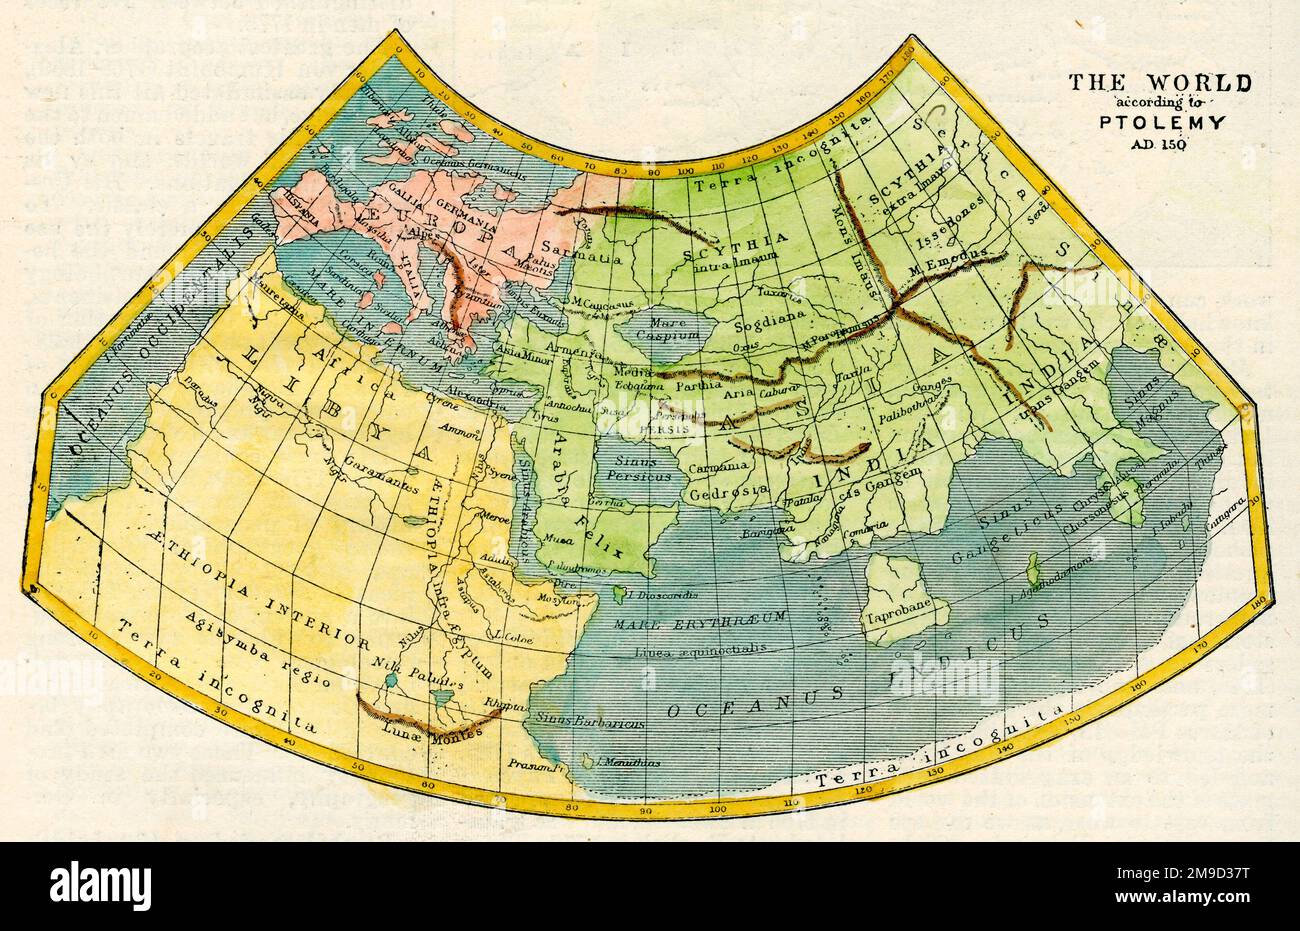 The World According To Ptolemy 150Ad Stock Photo